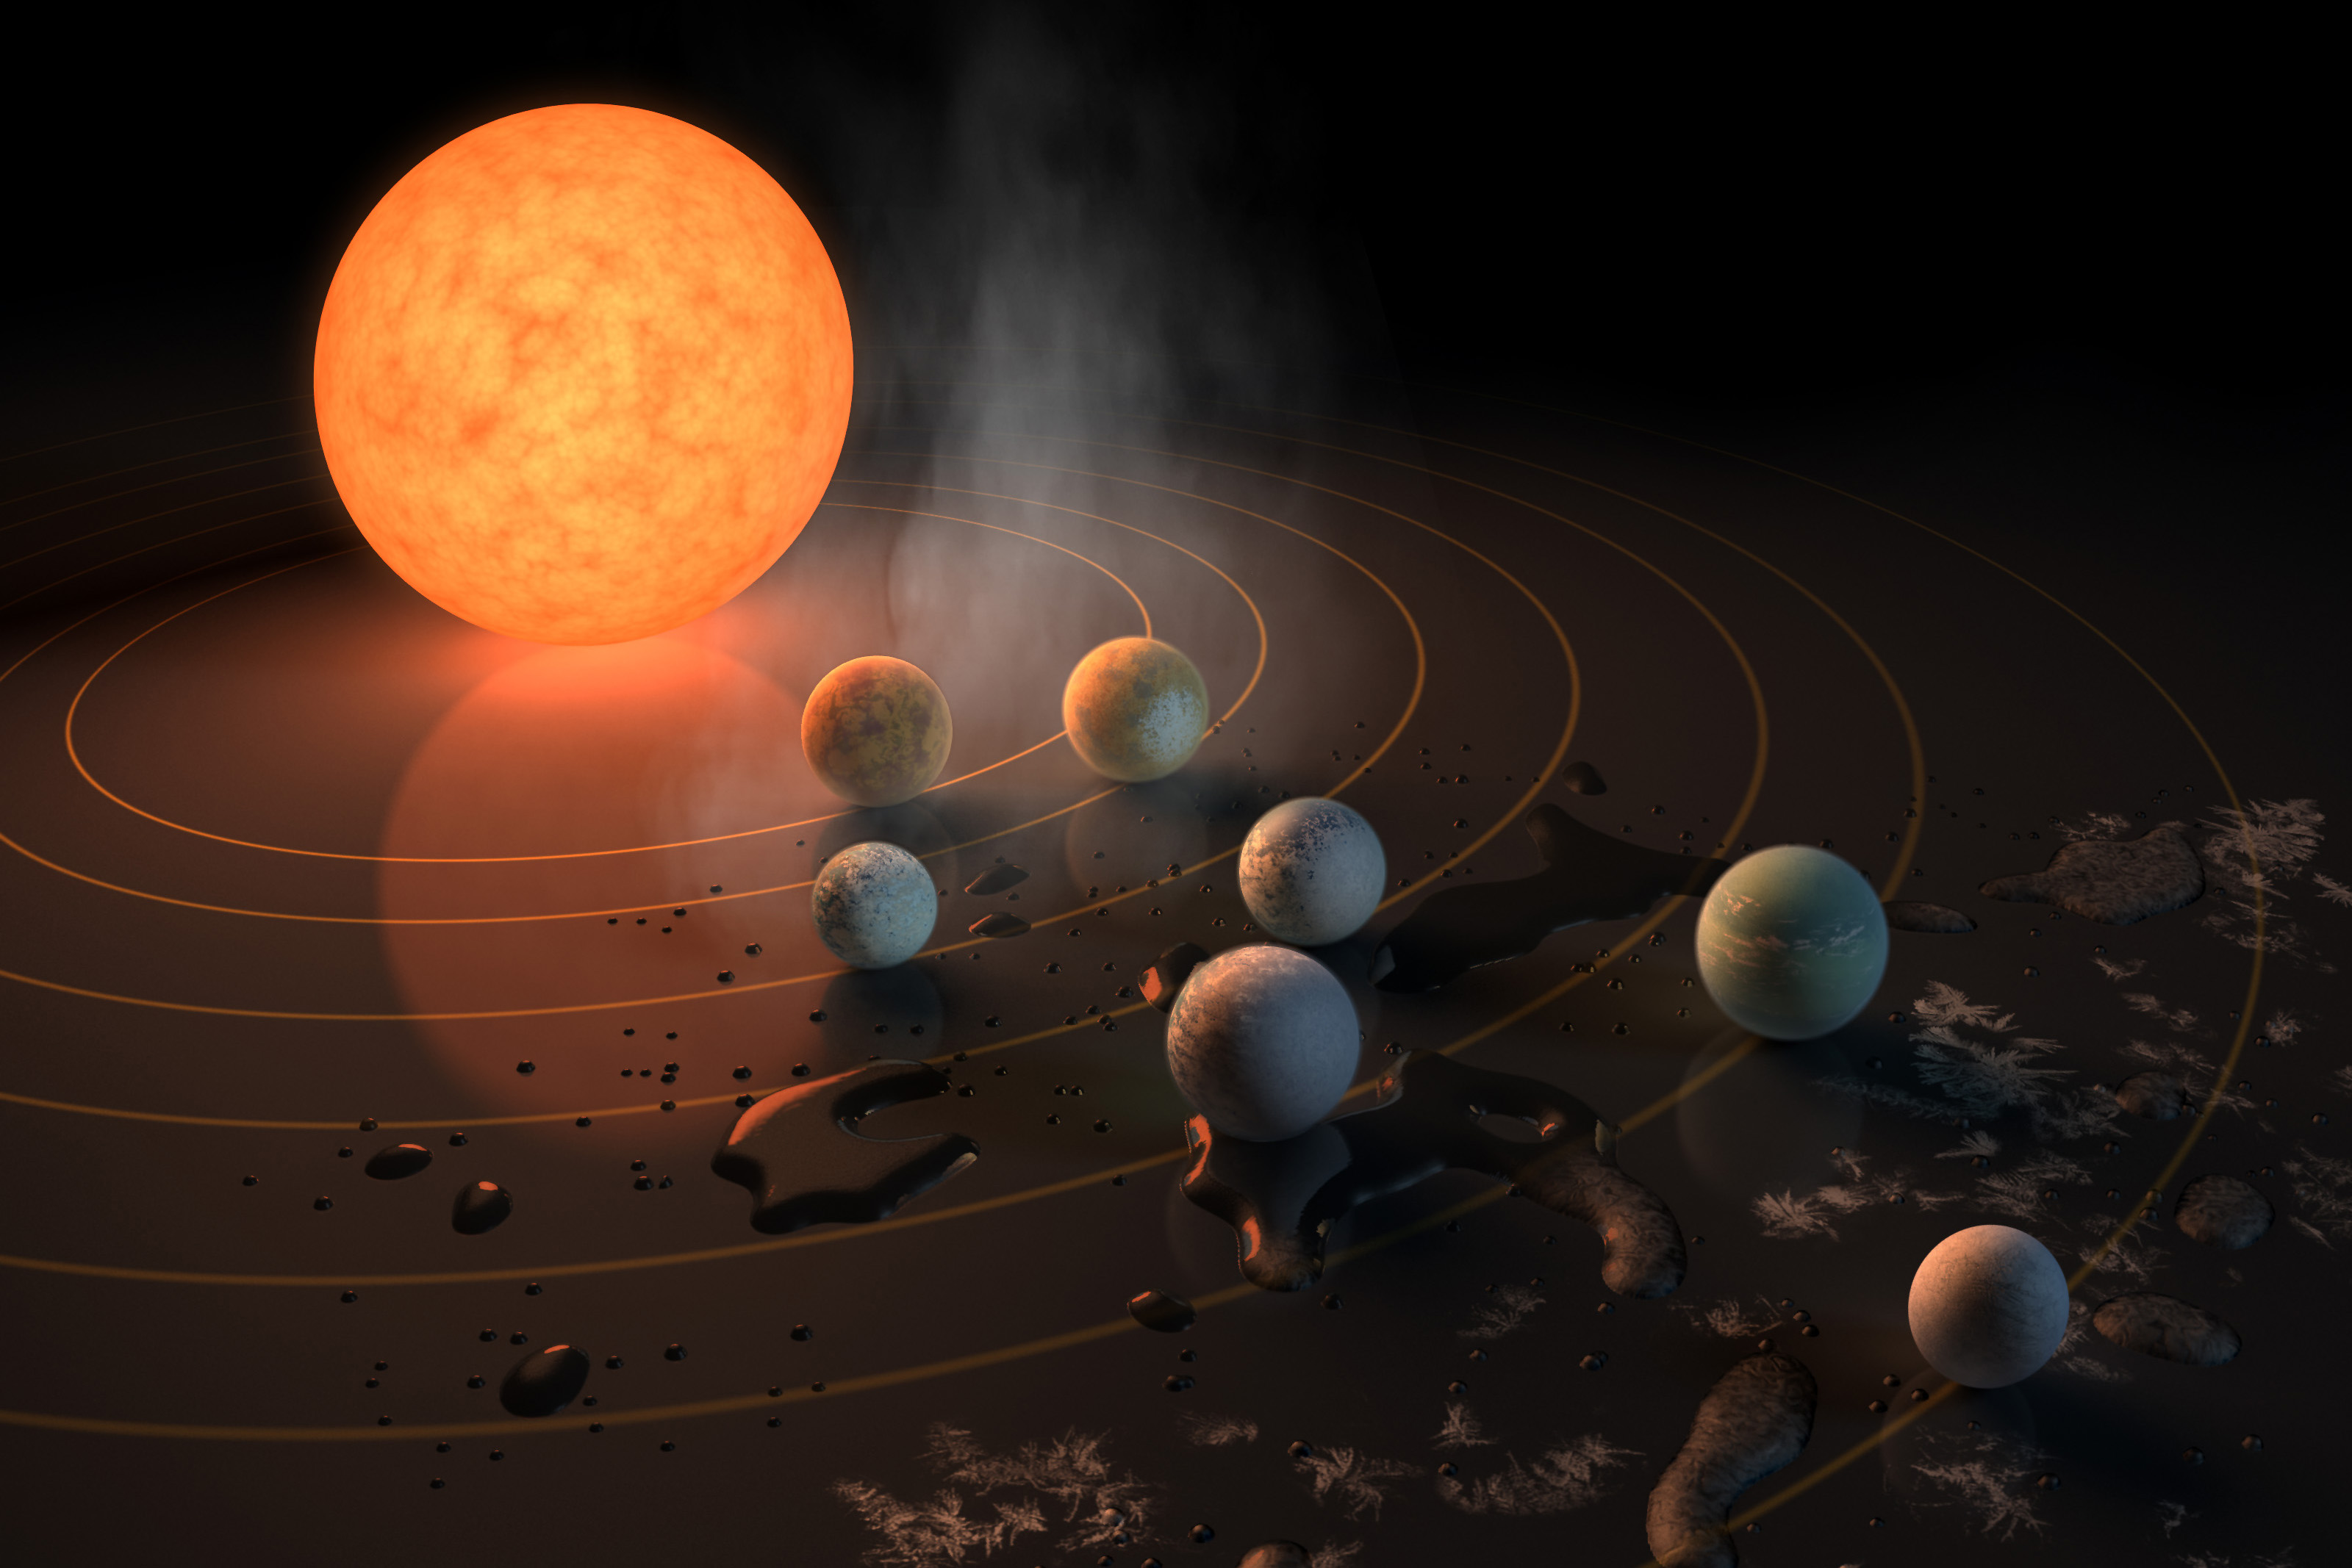 This artist's concept appeared on the Feb. 23, 2017 cover of the journal Nature announcing that the TRAPPIST-1 star, an ultra-cool dwarf, has seven Earth-size planets orbiting it. (NASA Image)